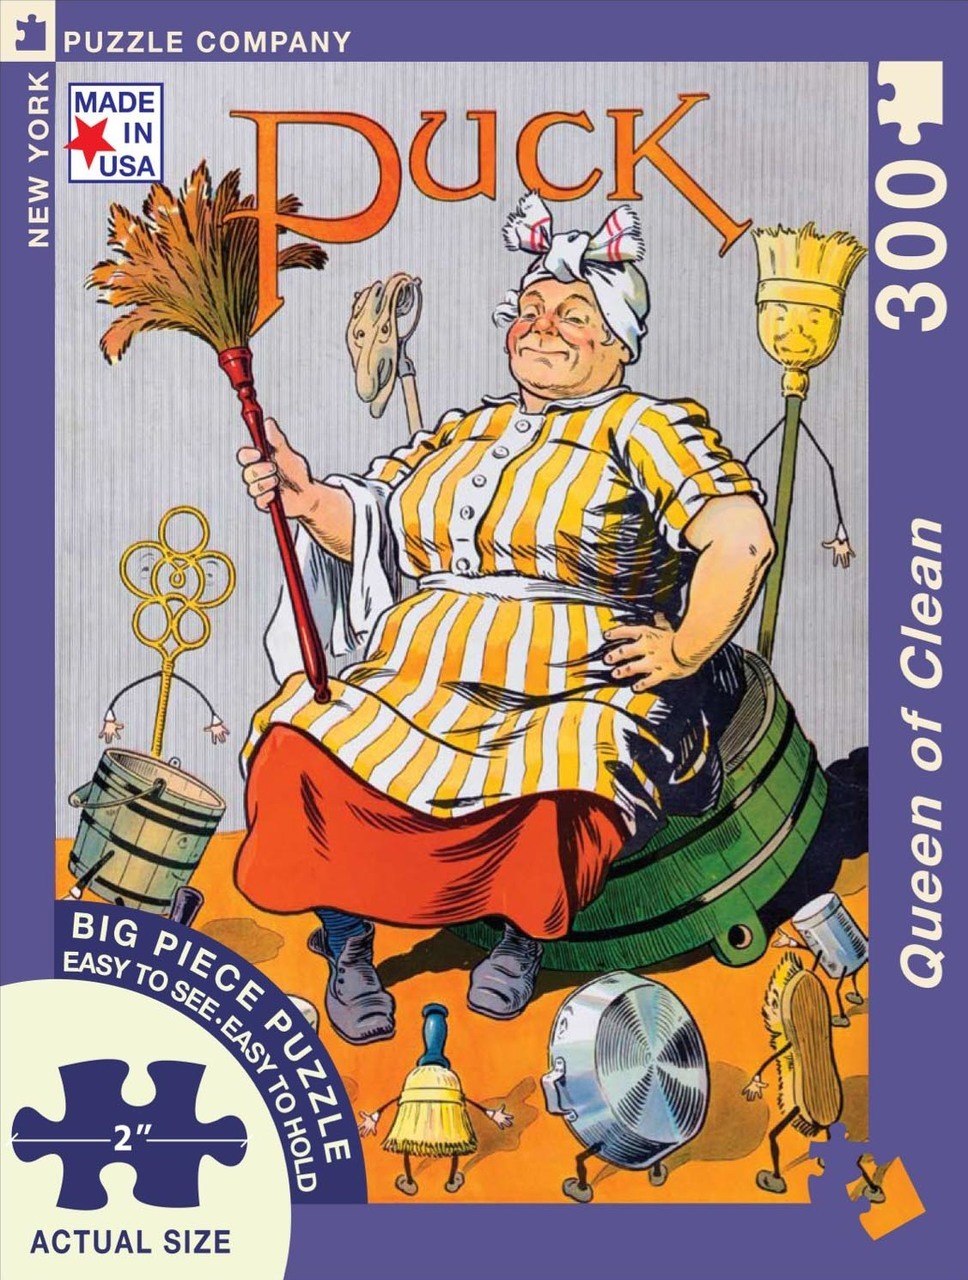 Queen of Clean - 300pc Jigsaw Puzzle by New York Puzzle Company